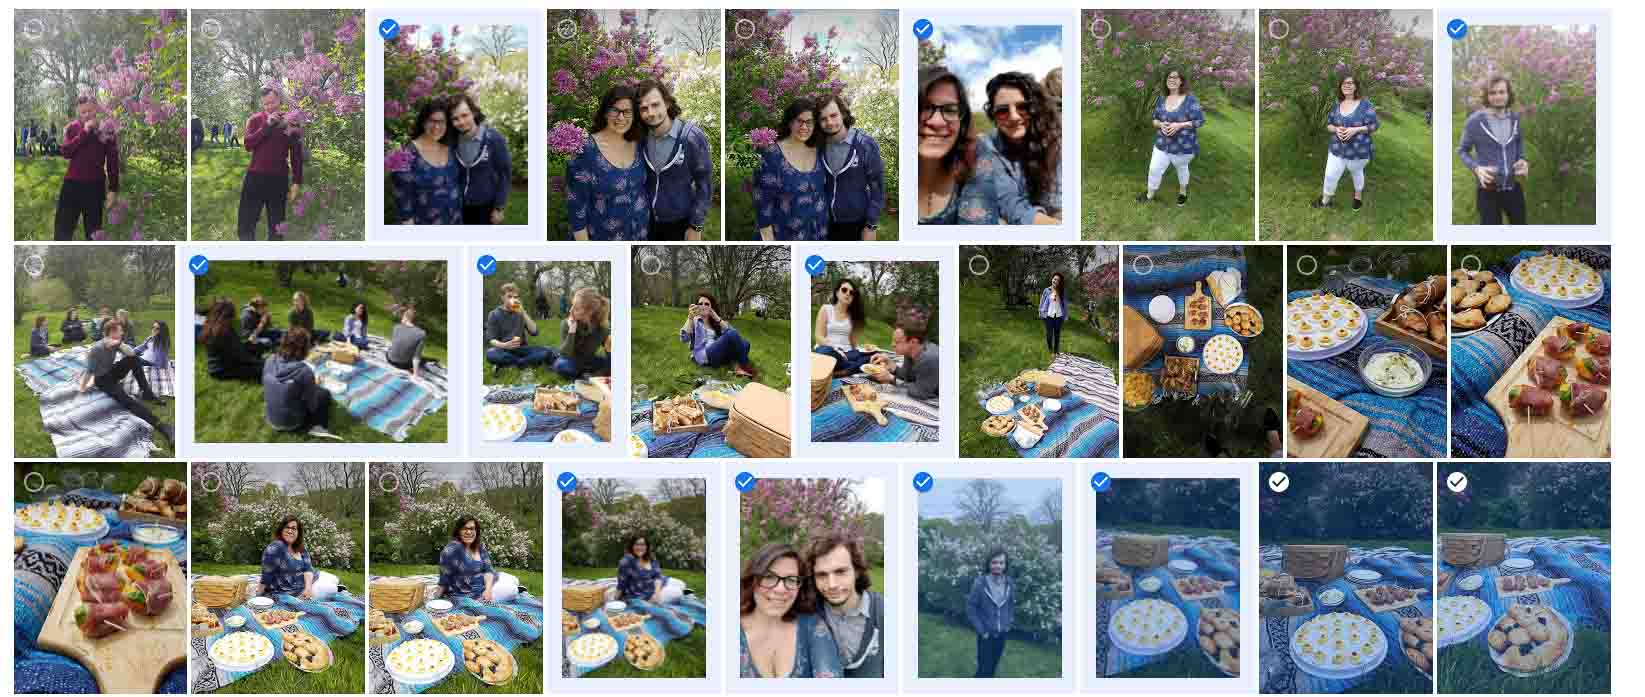 Photo Selection with Blue Checkmarks on Select Images